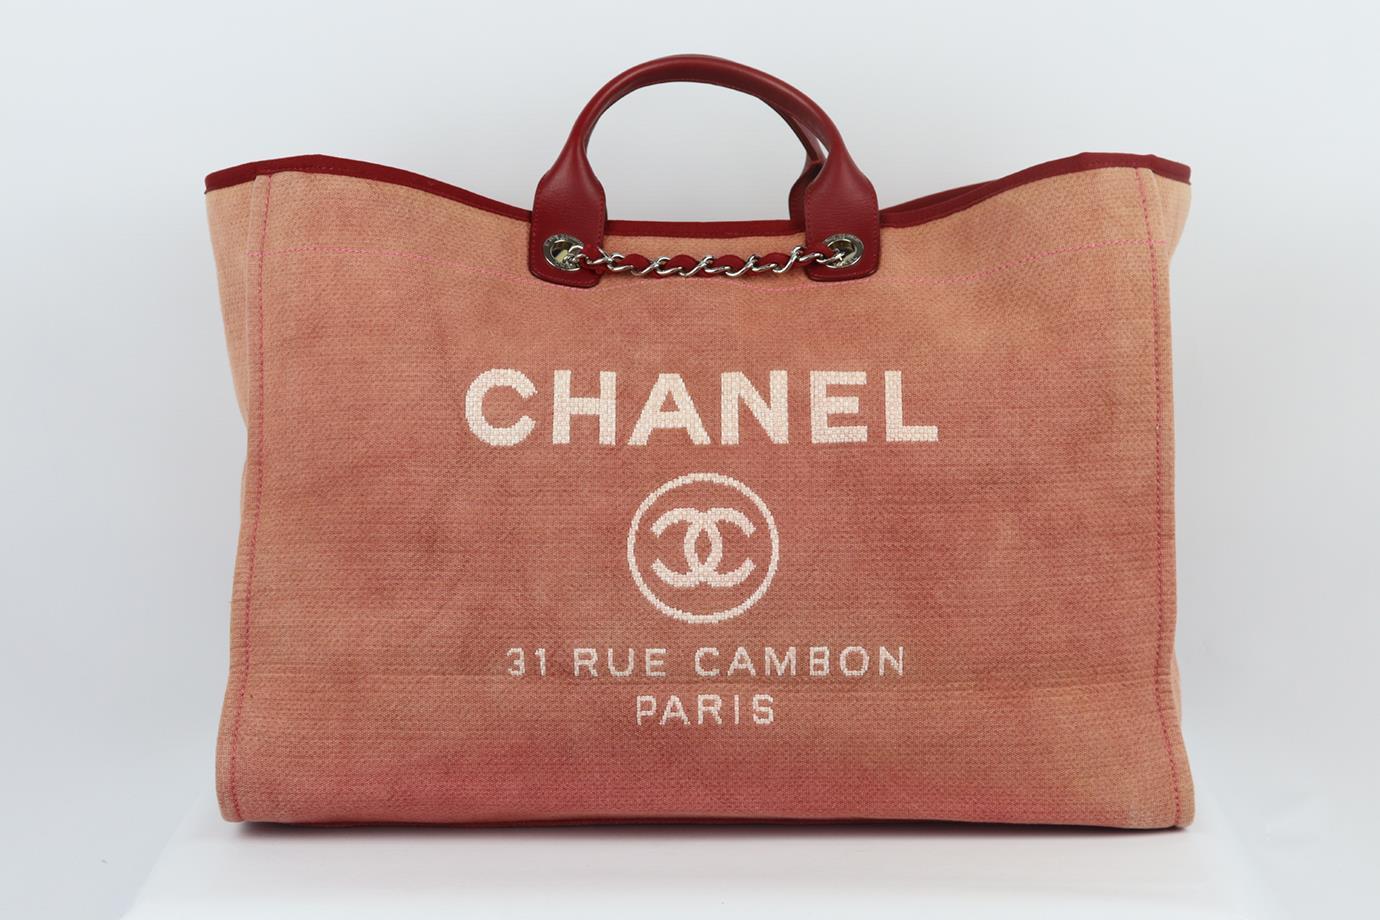 <ul>
<li>Chanel 2012 Deauville extra large canvas and leather tote bag.</li>
<li>Made in Italy, this beautiful 2012 Chanel extra large ‘Deauville’ tote bag has been made from dusty-pink canvas exterior with matching burgundy interior, this piece is